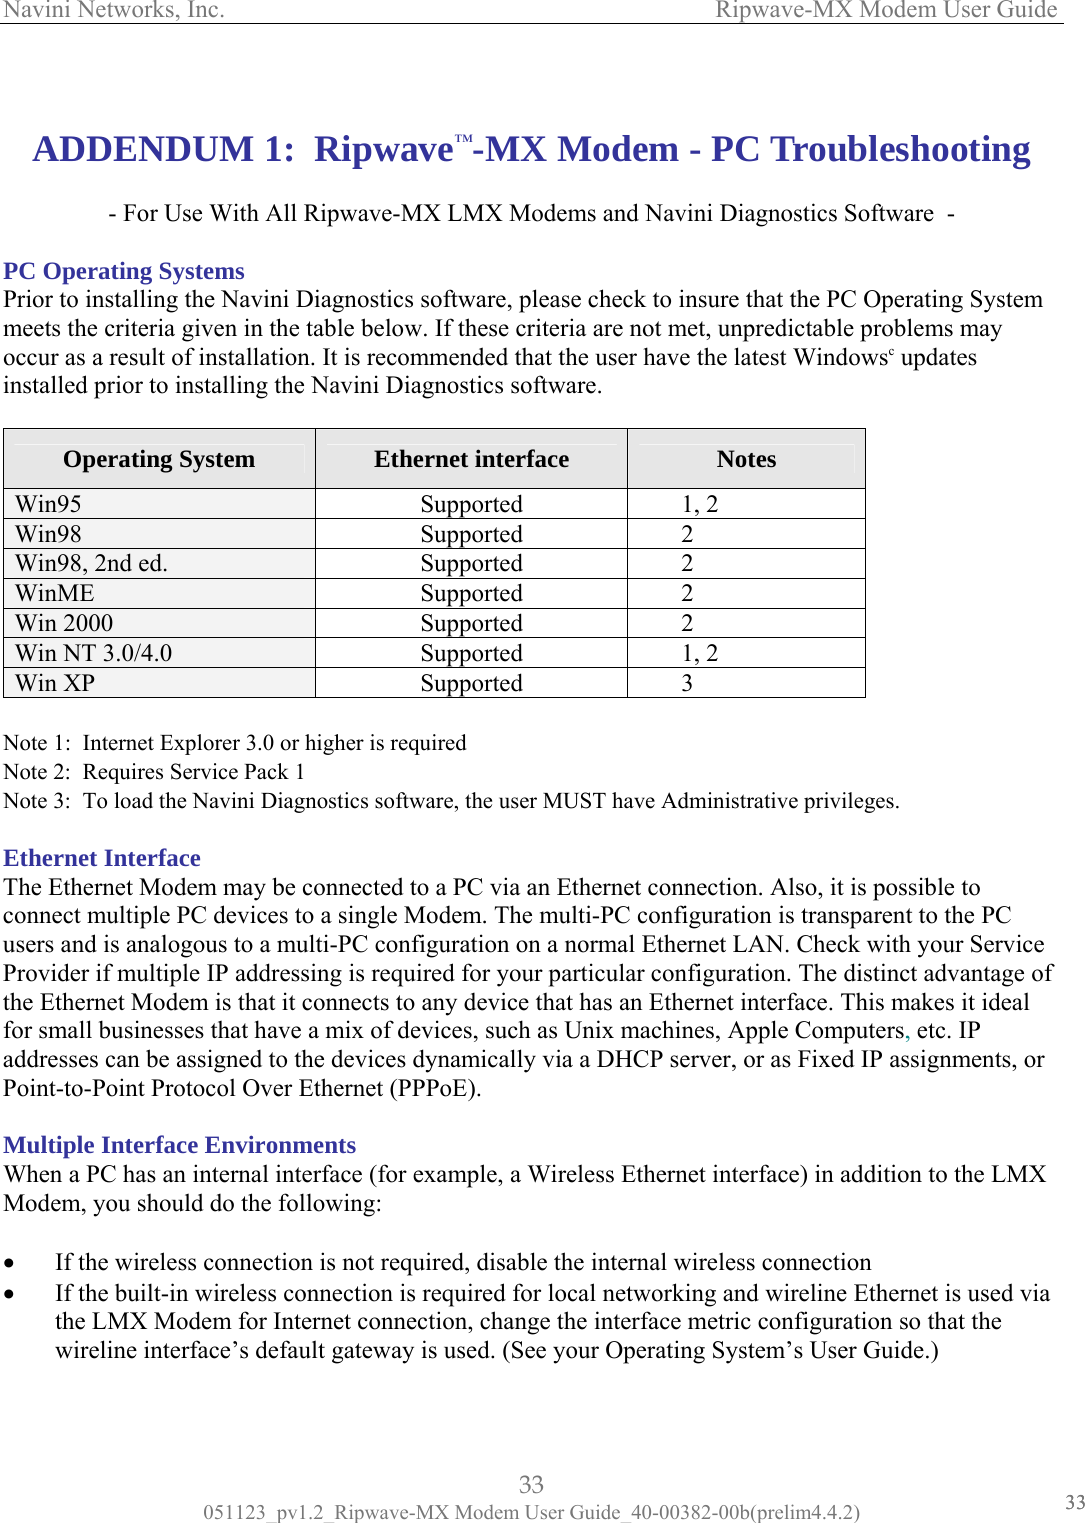 Navini Networks, Inc.                   Ripwave-MX Modem User Guide   ADDENDUM 1:  R Troubleshooting - For Use With AllC Operating Systems rior to installing the Navini  System eets the criteria given in the tab ay ccur as a result of installation. It  stalled prior to installing the Naipwave™-MX Modem - PC   Ripwave-MX LMX Modems and Navini Diagnostics Software  -  PP Diagnostics software, please check to insure that the PC Operating le below. If these criteria are not met, unpredictable problems m is recommended that the user have the latest Windowsc updatesvini Diagnostics software. moin Operating System  Ethernet interface  Notes Win95  Supported 1, 2 Win98  Supported 2 Win98, 2nd ed.  Supported 2 WinME  Supported 2 Win 2000  Supported 2 Win NT 3.0/4.0  Supported 1, 2 Win XP  Supported 3  Note 1:  Internet Explorer 3.0 orote 2:  Requires Service Pack 1 ote 3:  To load the Navini Diagnos ileges. thernet Interface he Ethernet Modem may be con  onnect multiple PC devices to a  PC sers and is analogous to a multi- thernet LAN. Check with your Service rovider if multiple IP addressing is required for your particular configuration. The distinct advantage of e Ethernet Modem is that it s it ideal r small businesses that have a m  ddresses can be assigned to the d ents, or oint-to-Point Protocol Over Eth E). ultiple Interface Environmhen a PC has an internal in  LMX odem, you should do the fo If the wireless connectio If the built-in wireless connection is required for local networking and wireline Ethernet is used via the LMX Modem for Int hat the wireline interface’s defa  higher is required tics software, the user MUST have Administrative privNN ET nected to a PC via an Ethernet connection. Also, it is possible tosingle Modem. The multi-PC configuration is transparent to the PC configuration on a normal EcuPth  connects to any device that has an Ethernet interface. This makeix of devices, such as Unix machines, Apple Computers, etc. IPevices dynamically via a DHCP server, or as Fixed IP assignmernet (PPPofoaP M ents terface (for example, a Wireless Ethernet interface) in addition to thellowing: n is not required, disable the internal wireless connection  WM ••ernet connection, change the interface metric configuration so tult gateway is used. (See your Operating System’s User Guide.) 33 051123_pv1.2_Ripwave-MX Modem User Guide_40-00382-00b(prelim4.4.2) 3333